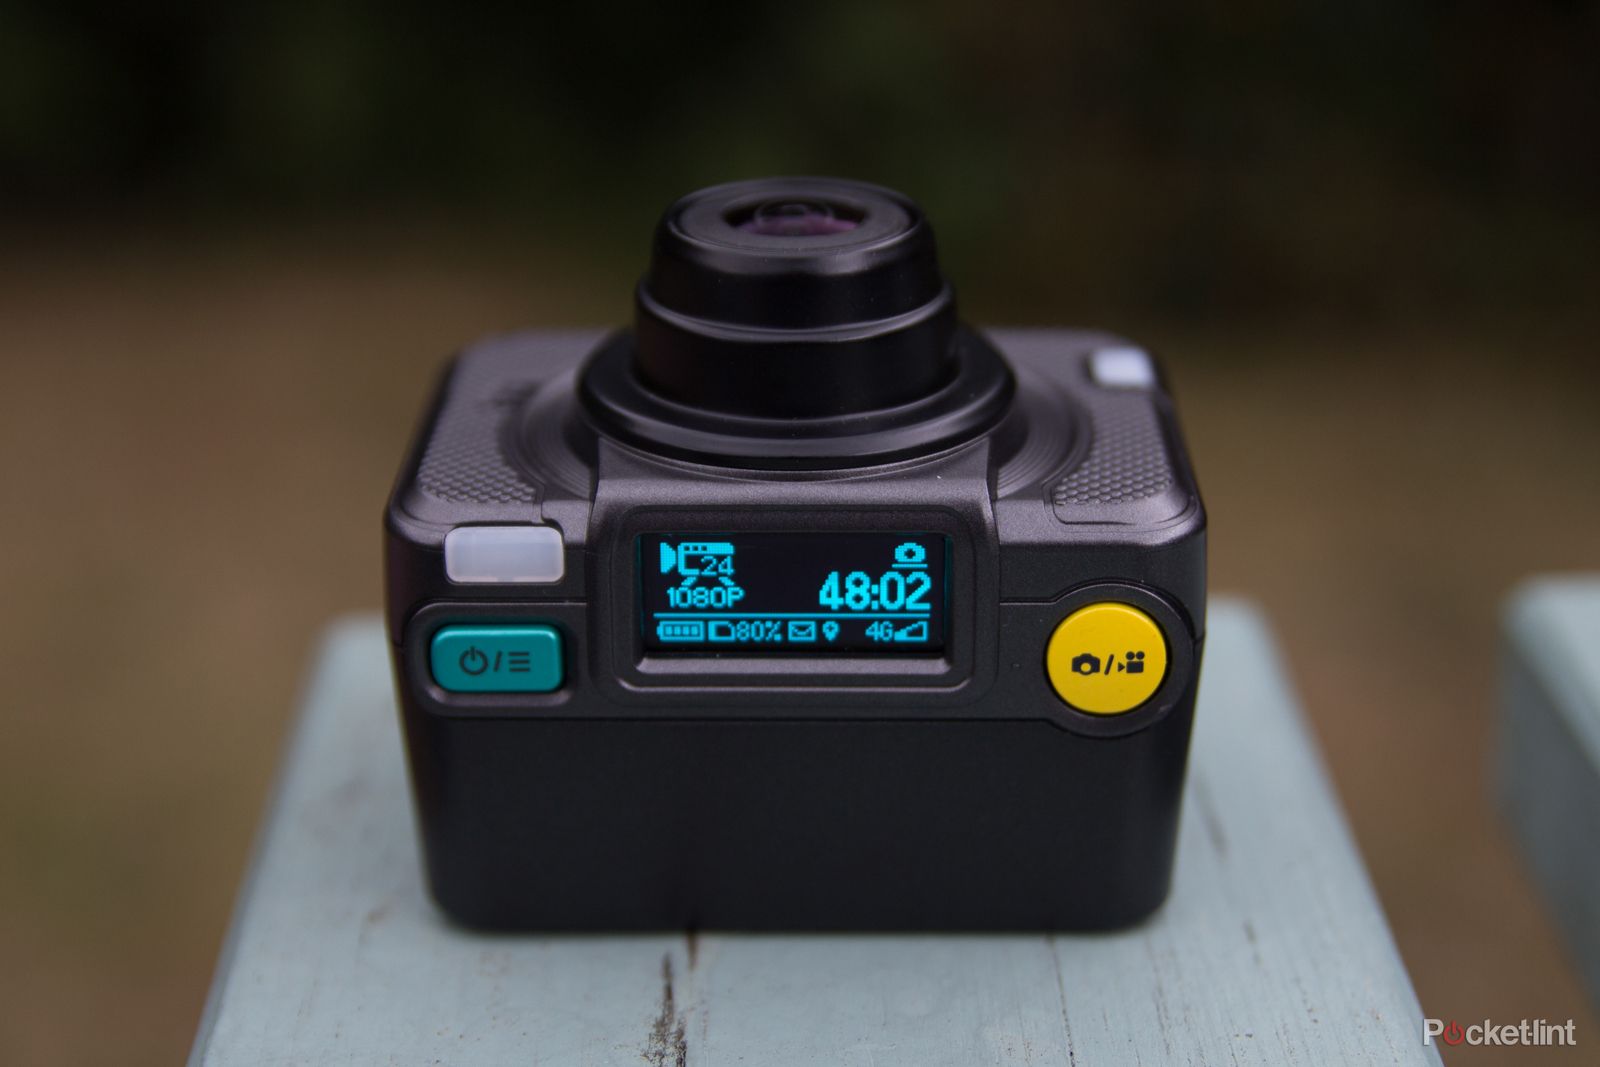 4gee action cam review image 4